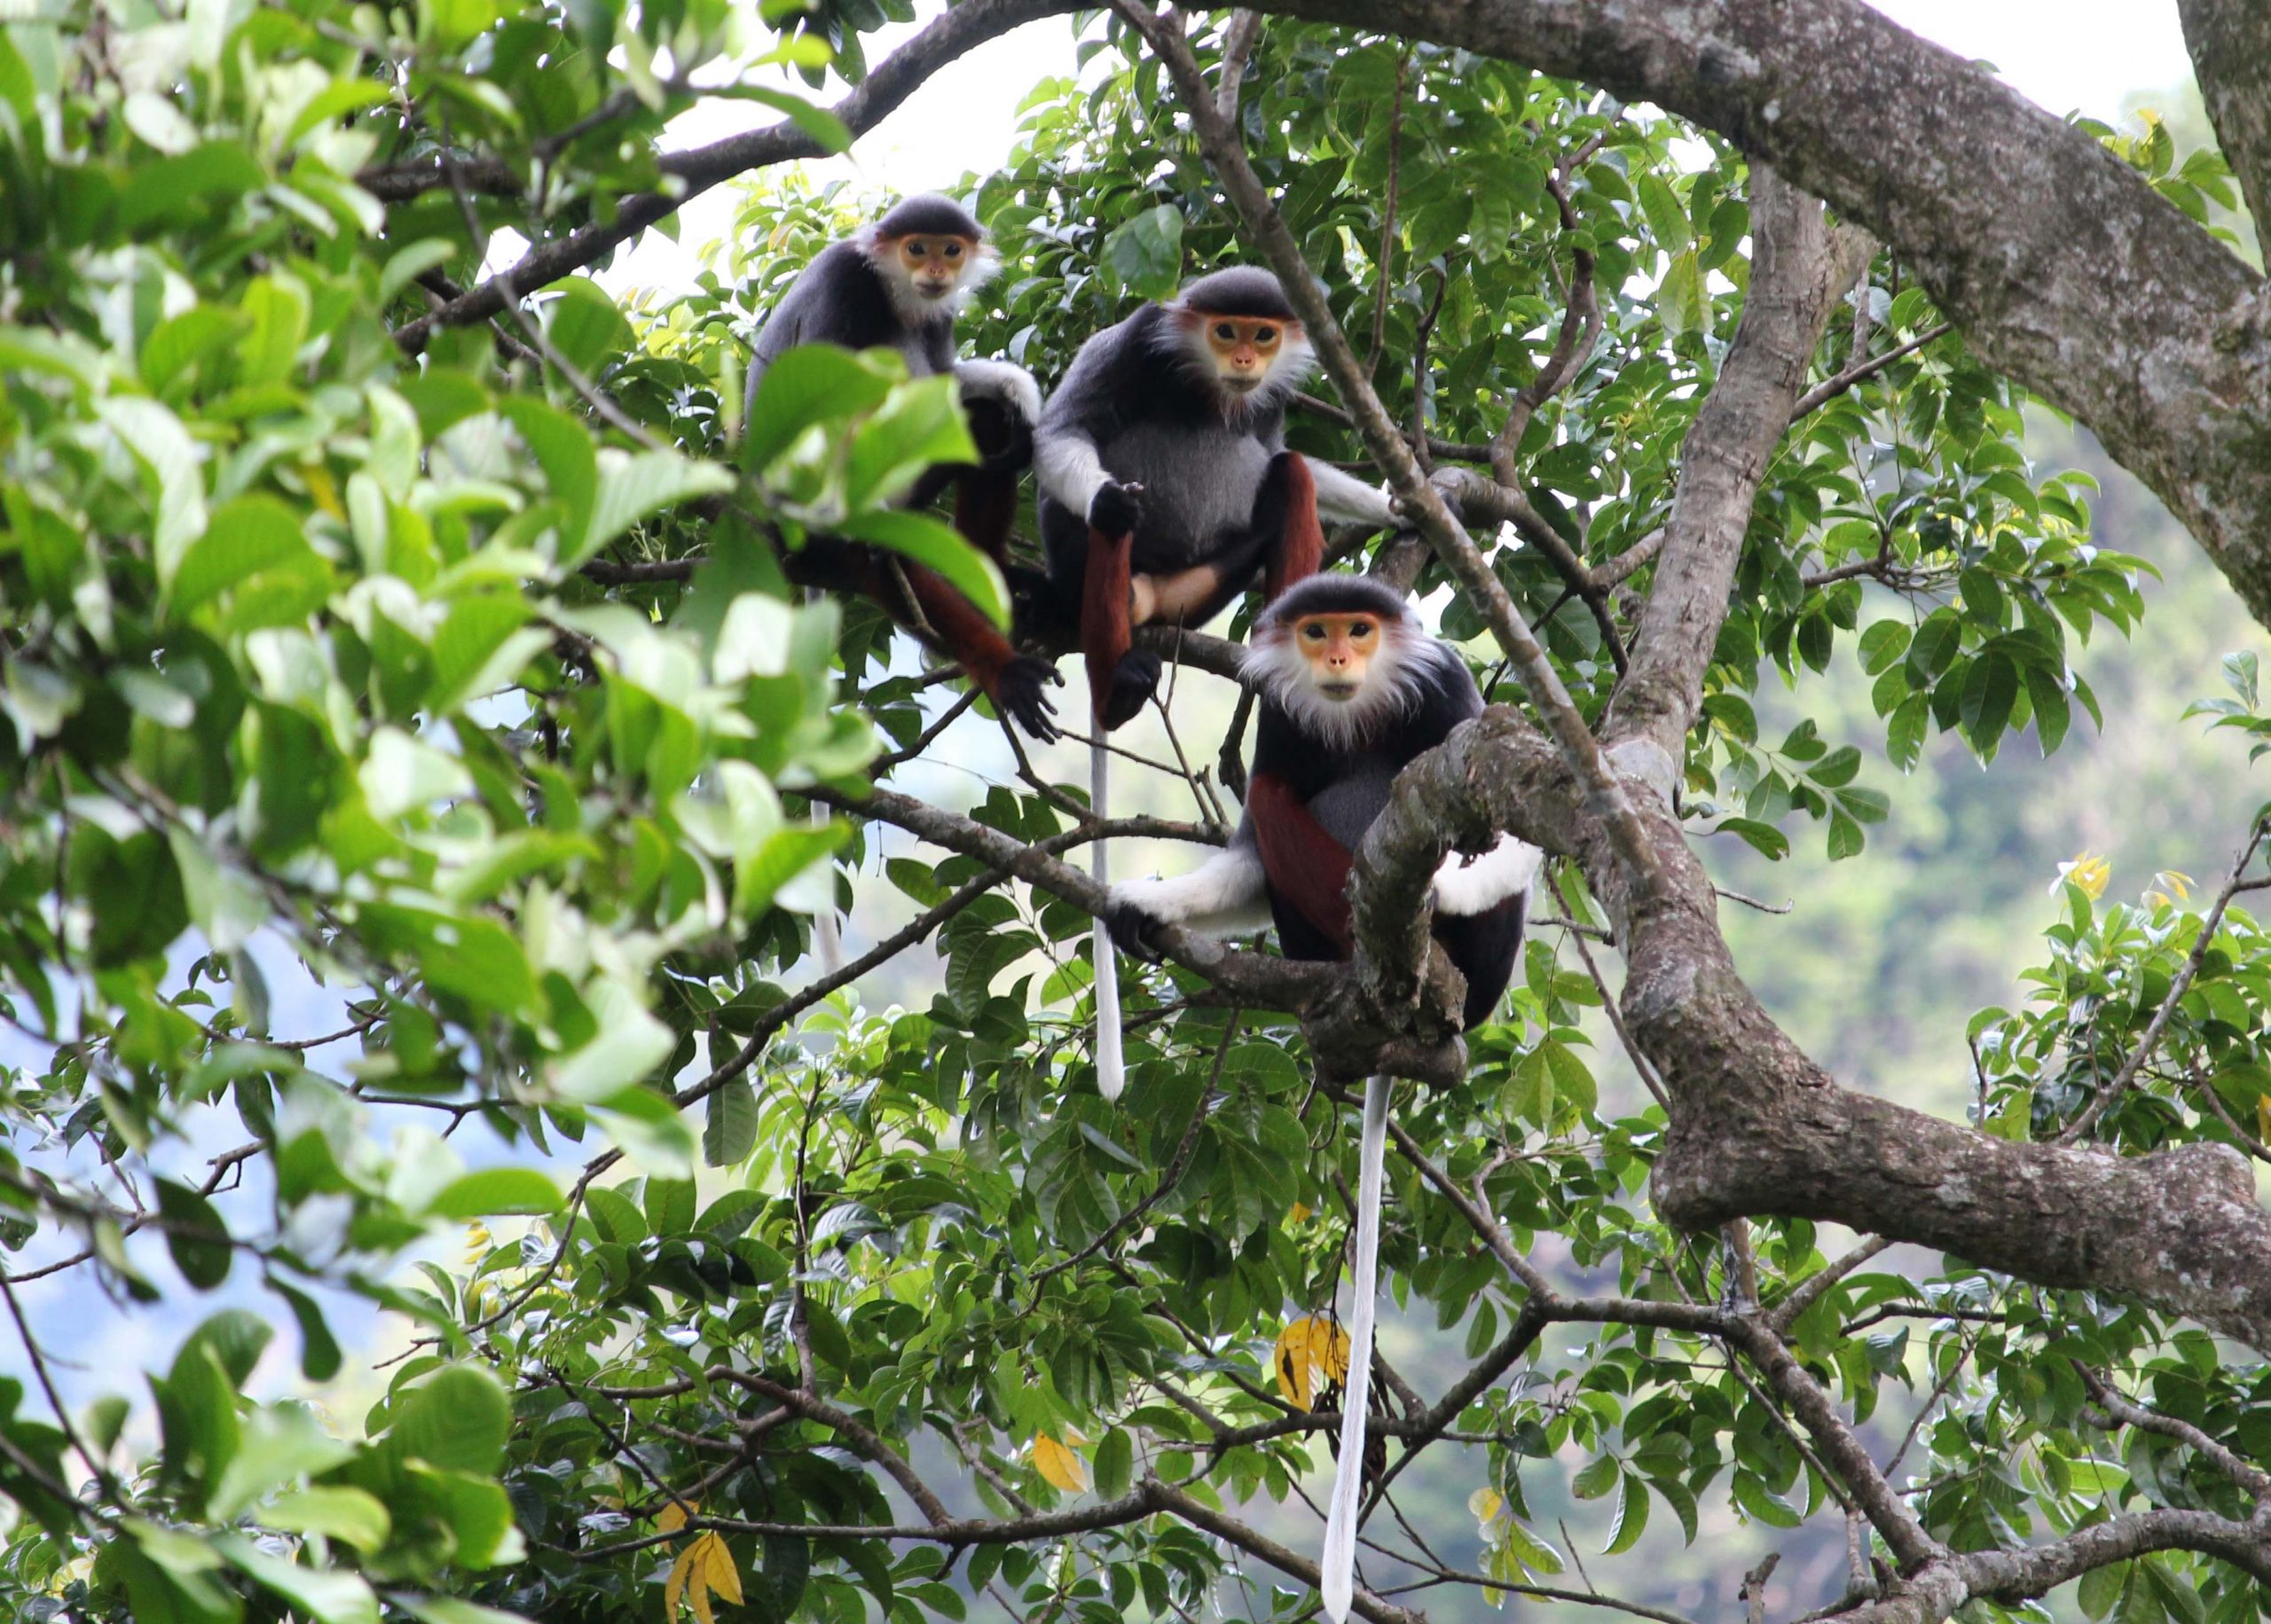 Viet Nature organized an educational event entitled “Exploring the Red-shanked Douc Langur” in Dong Chau – Khe Nuoc Trong forest